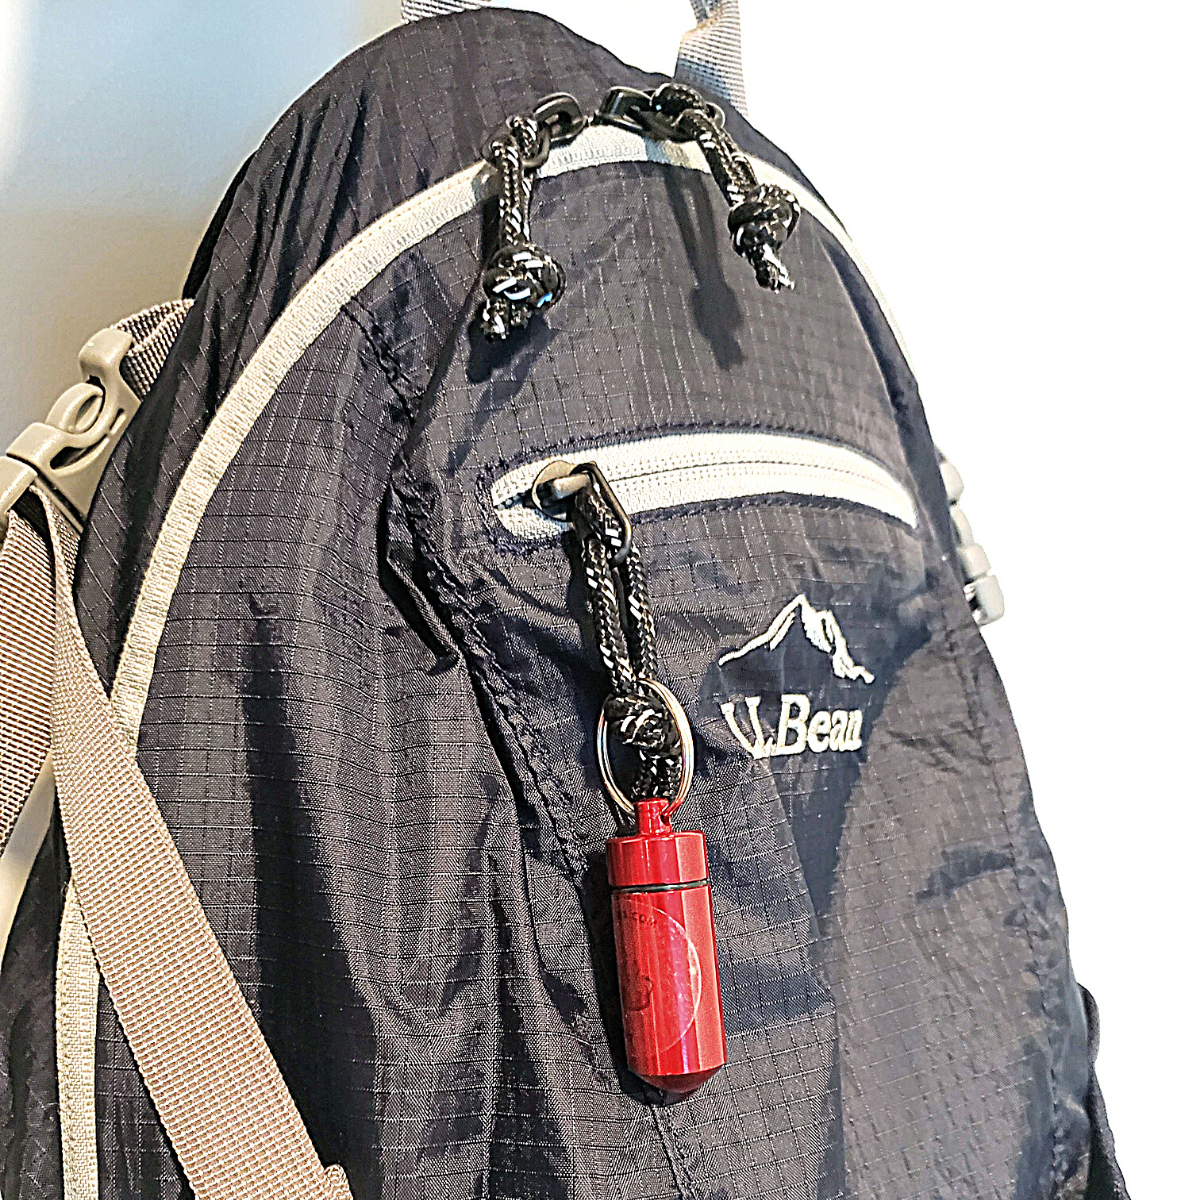 red spice vial keychain on a blue backpack